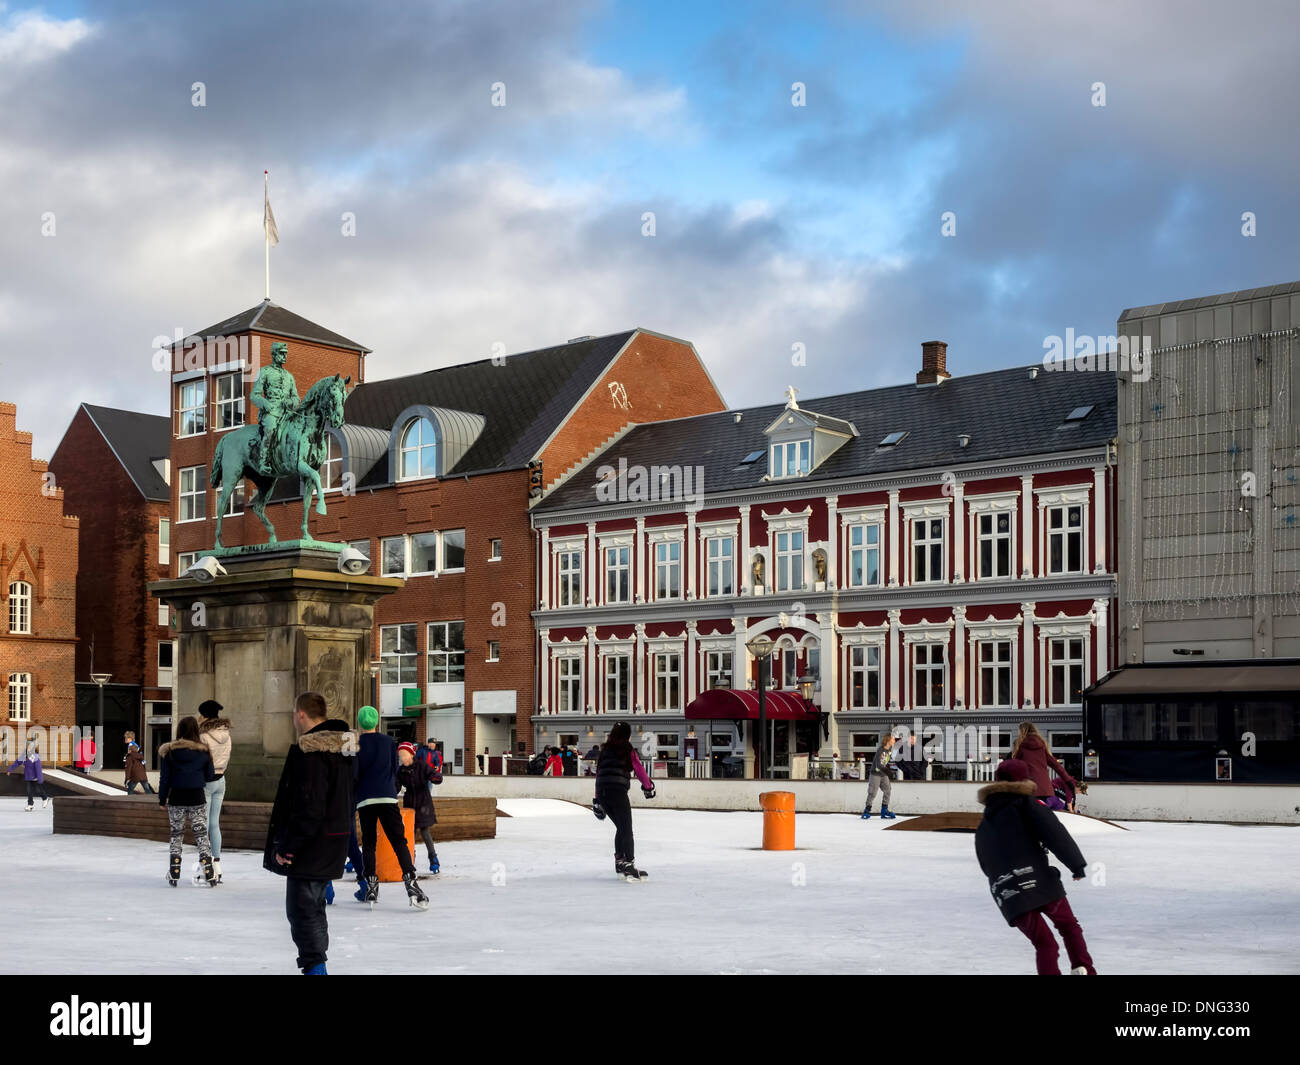 Main square with public ice rink in Esbjerg, Denmark Stock Photo